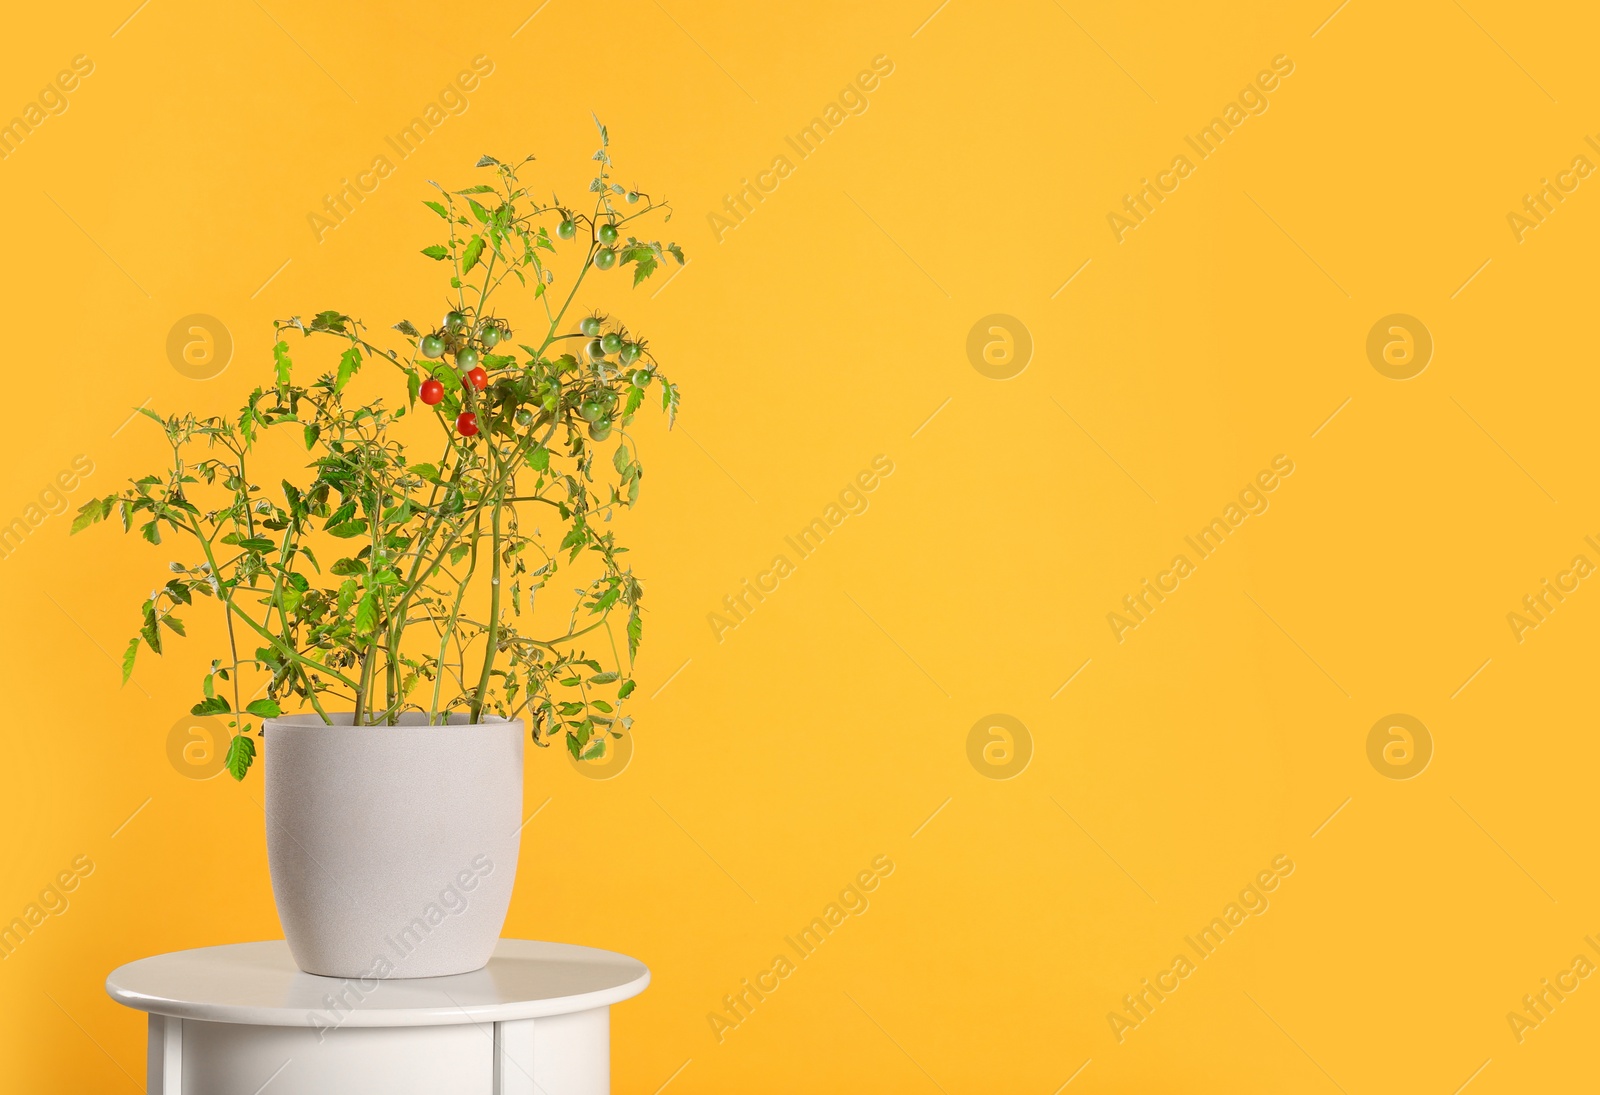 Photo of Tomato plant in pot on table against yellow background. Space for text